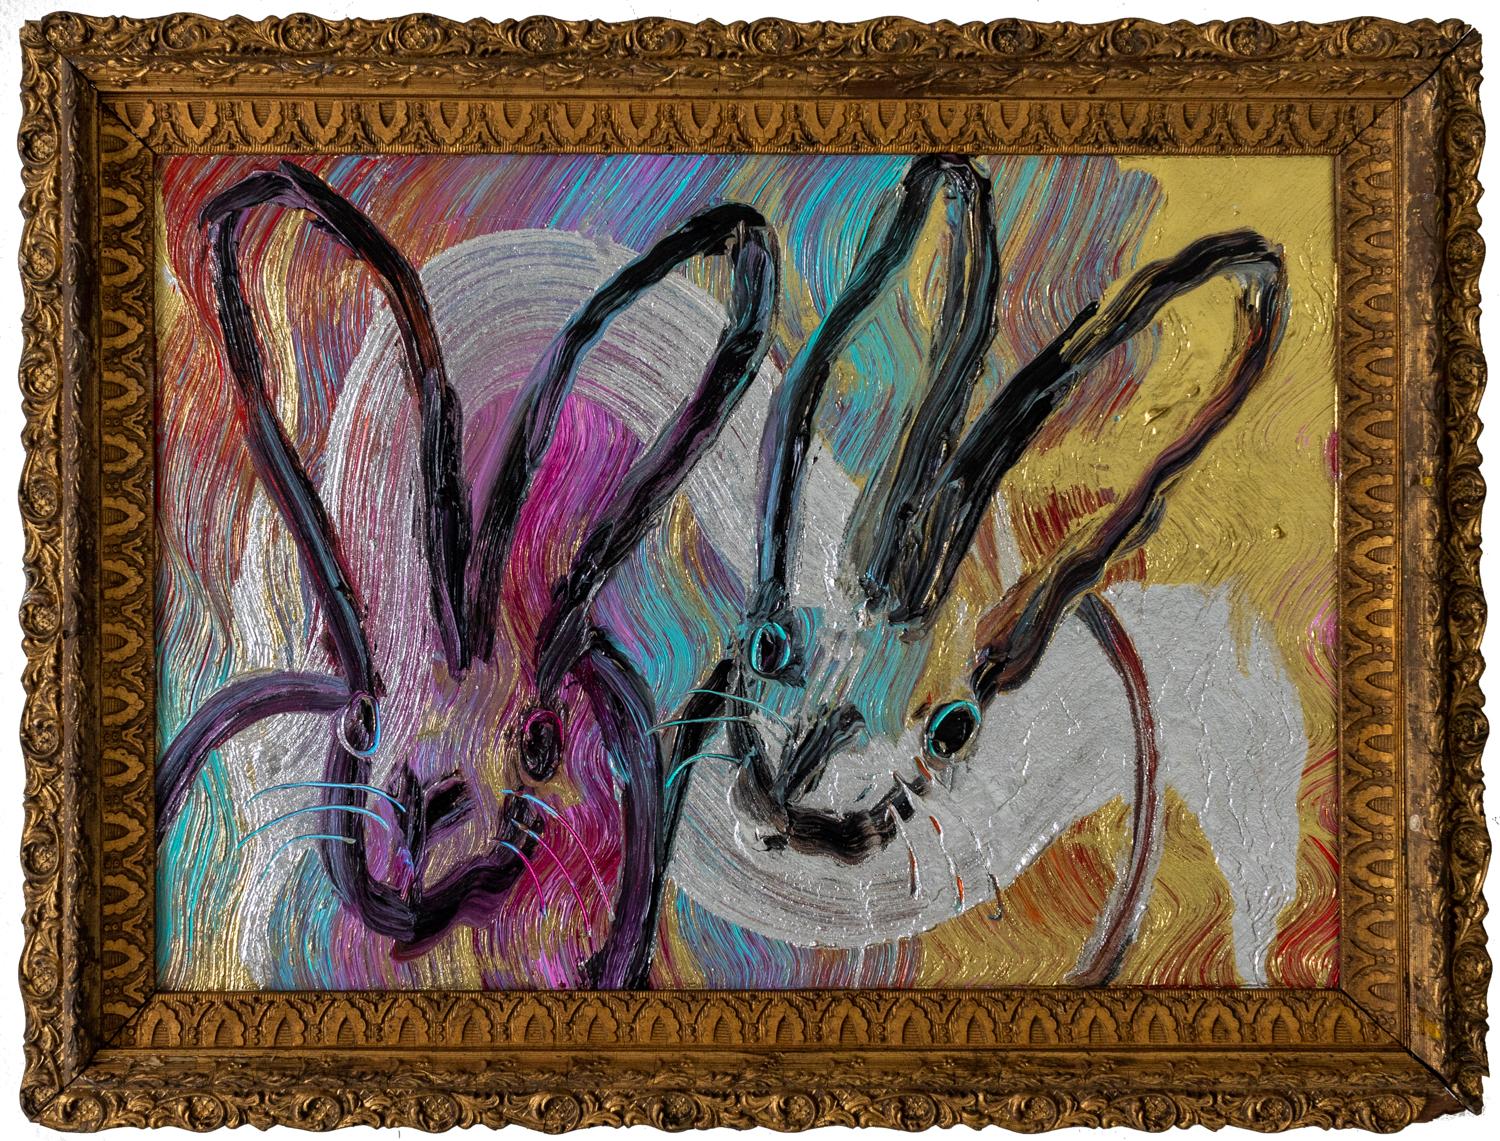 Hunt Slonem "Totem with Two" Metallic Rainbow Bunnies
Black outlined bunnies on a silver and gold metallic background in an antique frame

Unframed: 12.5 x 17.5 inches
Framed: 16 x 21 inches
*Painting is framed - Please note Hunt Slonem paintings